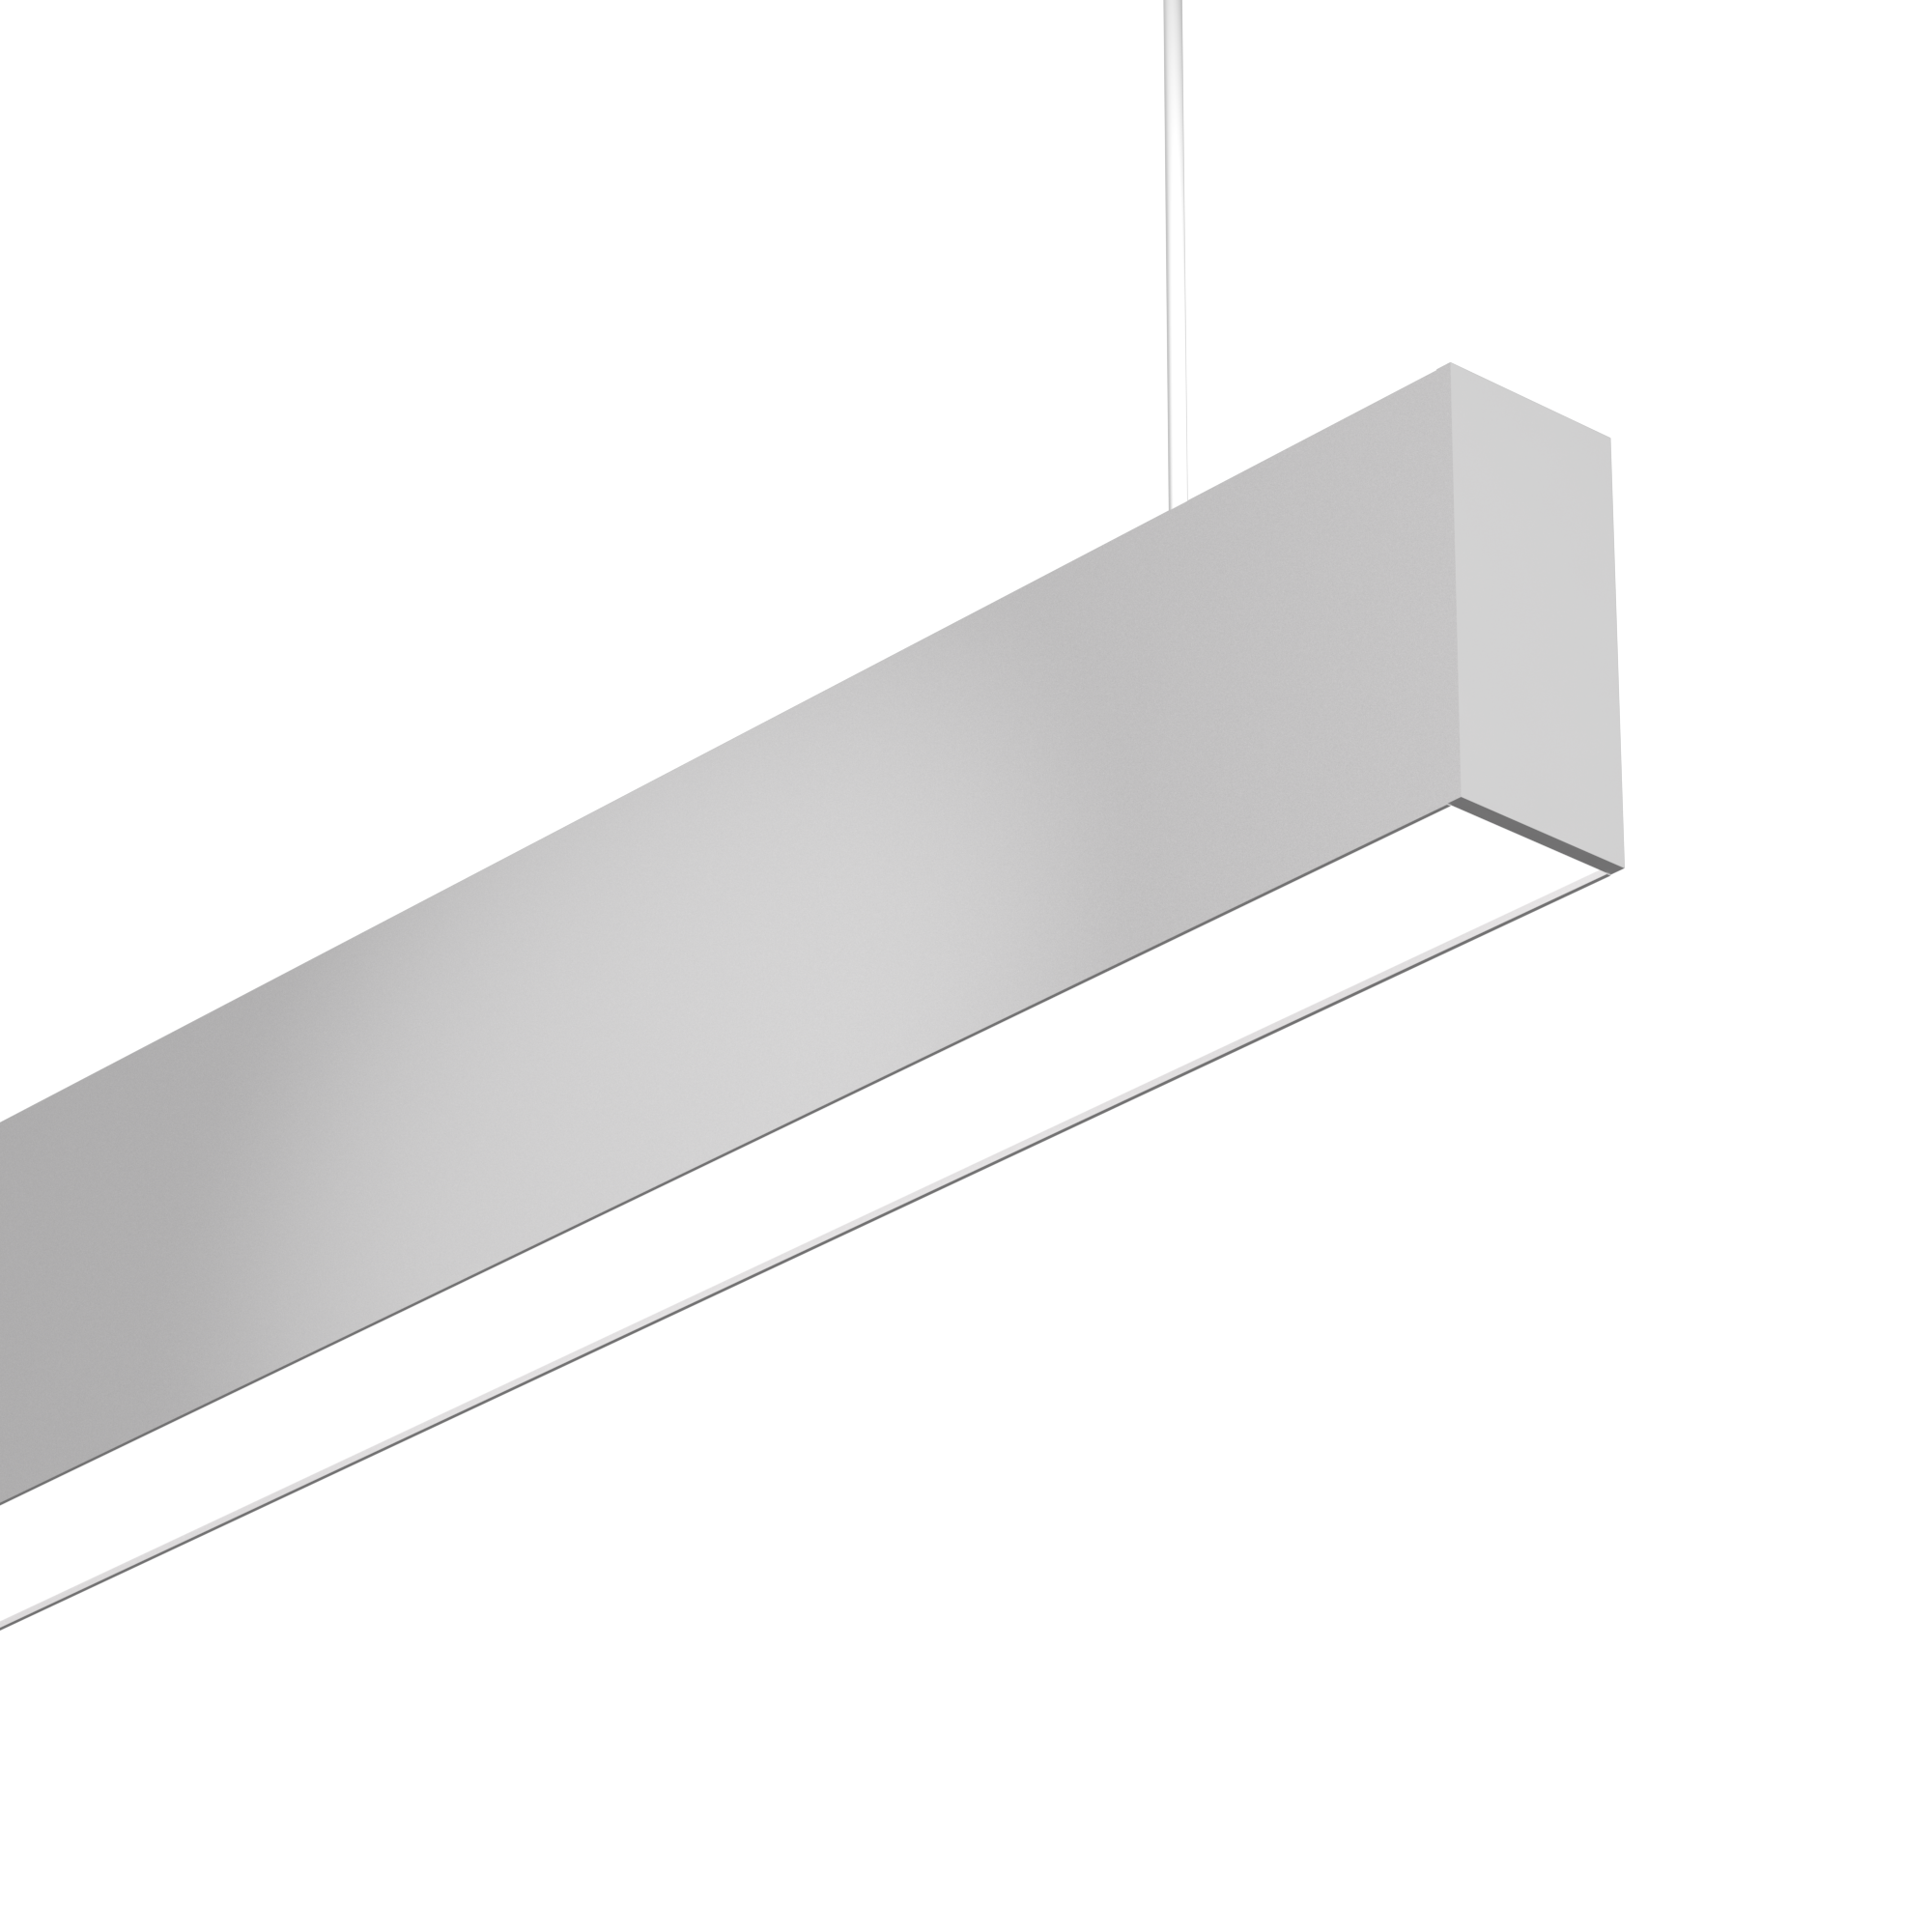 Pendant linear with integral on-board Driver
MICROBeam Pendant is a 1.4” x 2.95” sized linear for suspension mouting with an integral, field serviceable, on-board driver. MICROBeam Pendant brings SmartBeam® capabilities up to a powerful 2000 lumens per foot combined direct and indirect. It’s small size designed to compliment architectural space. MICROBeam Pendant is fully field serviceable and can be supplied in continuous runs and a variety of visually appealing shapes.
Typical Applications

 	Offices and co-working spaces
 	Schools, colleges and universities
 	Retail spaces